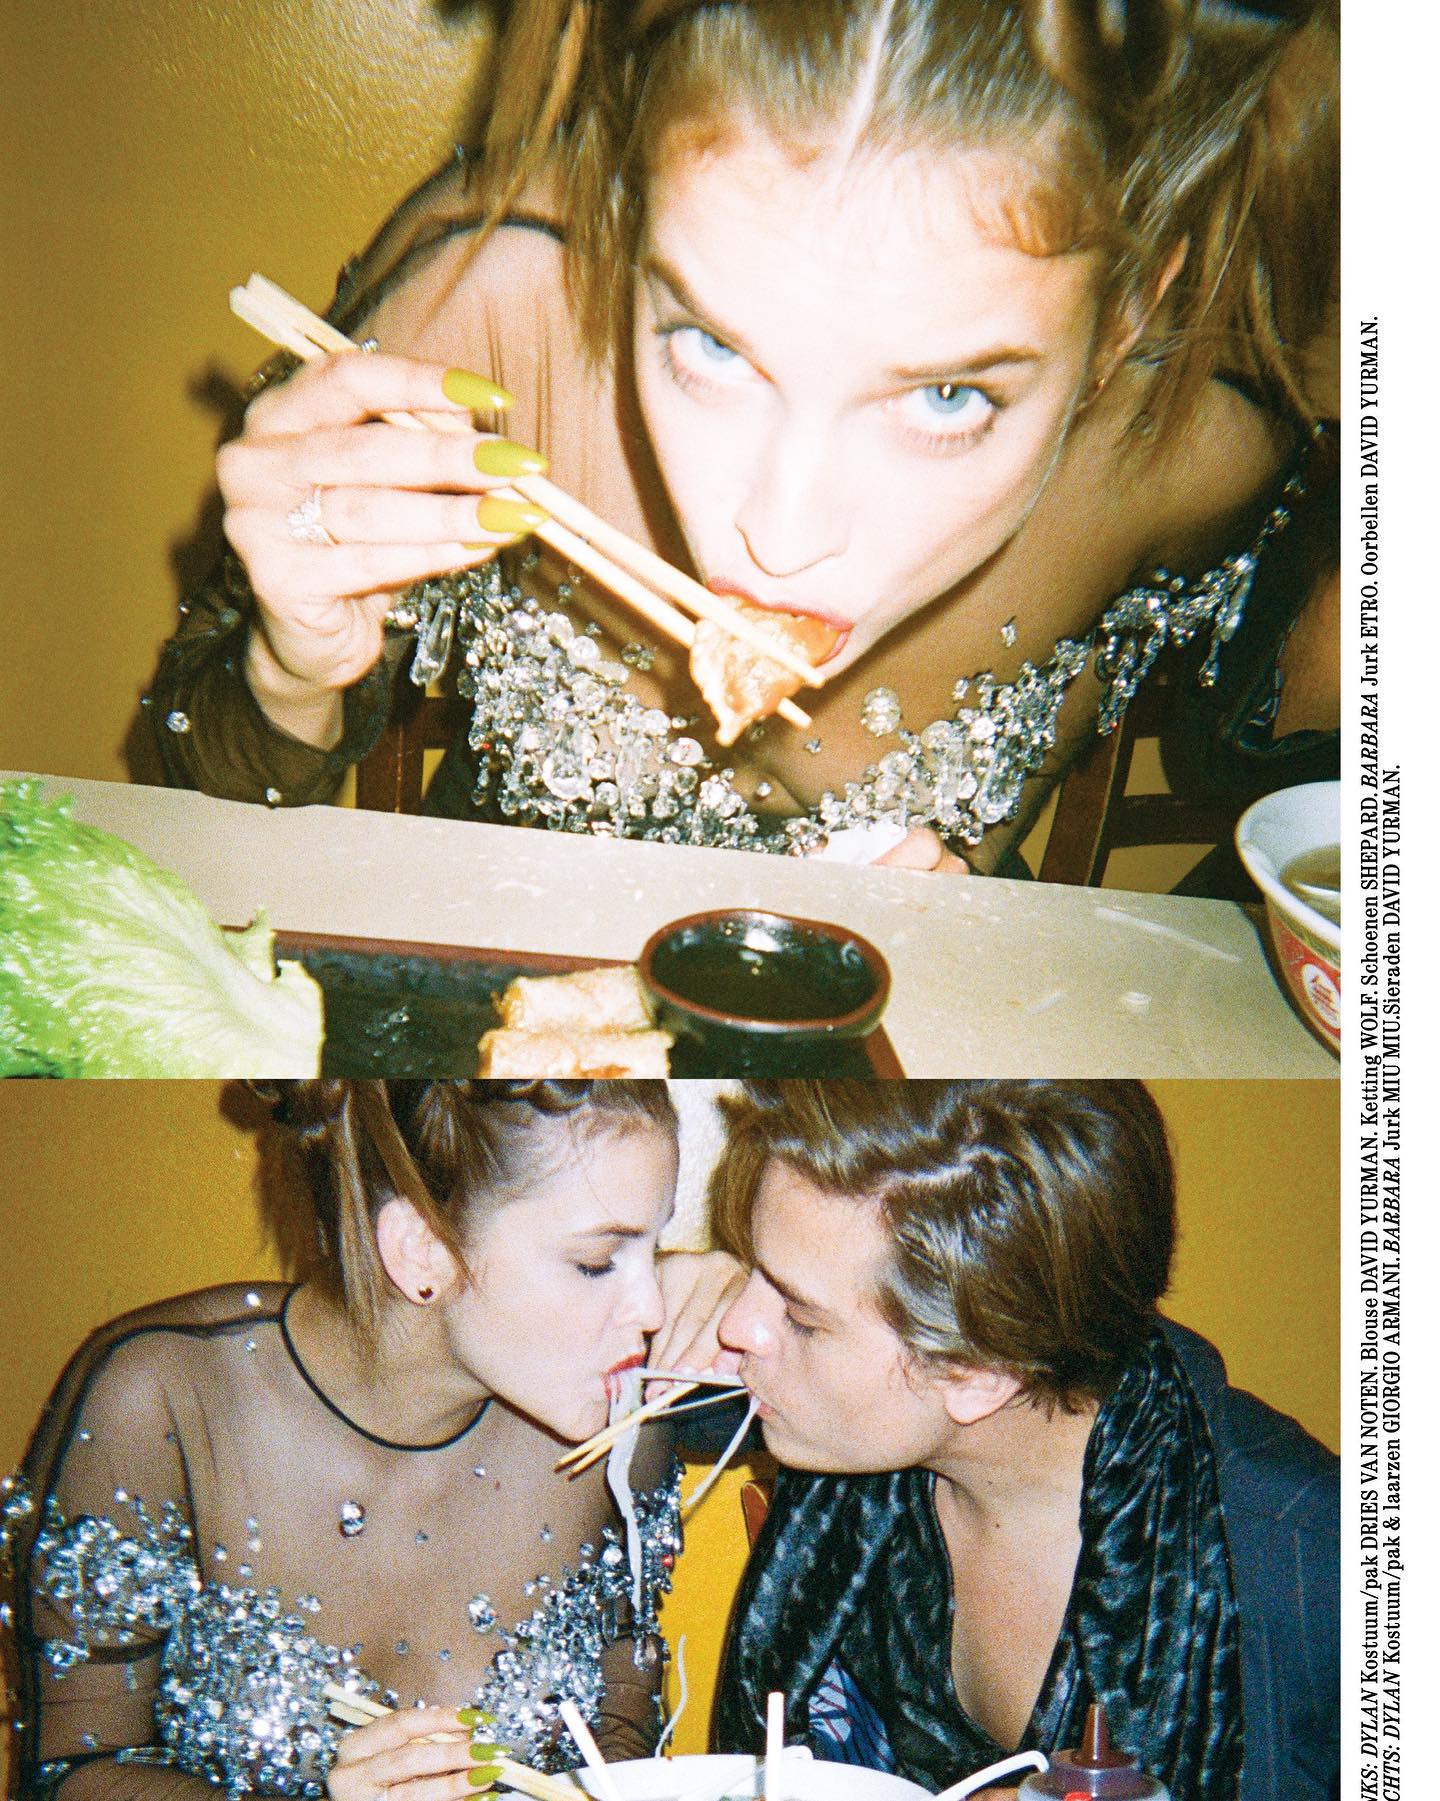 Barbara Palvin y Dylan Sprouse Hit the Cover! - Photo 13